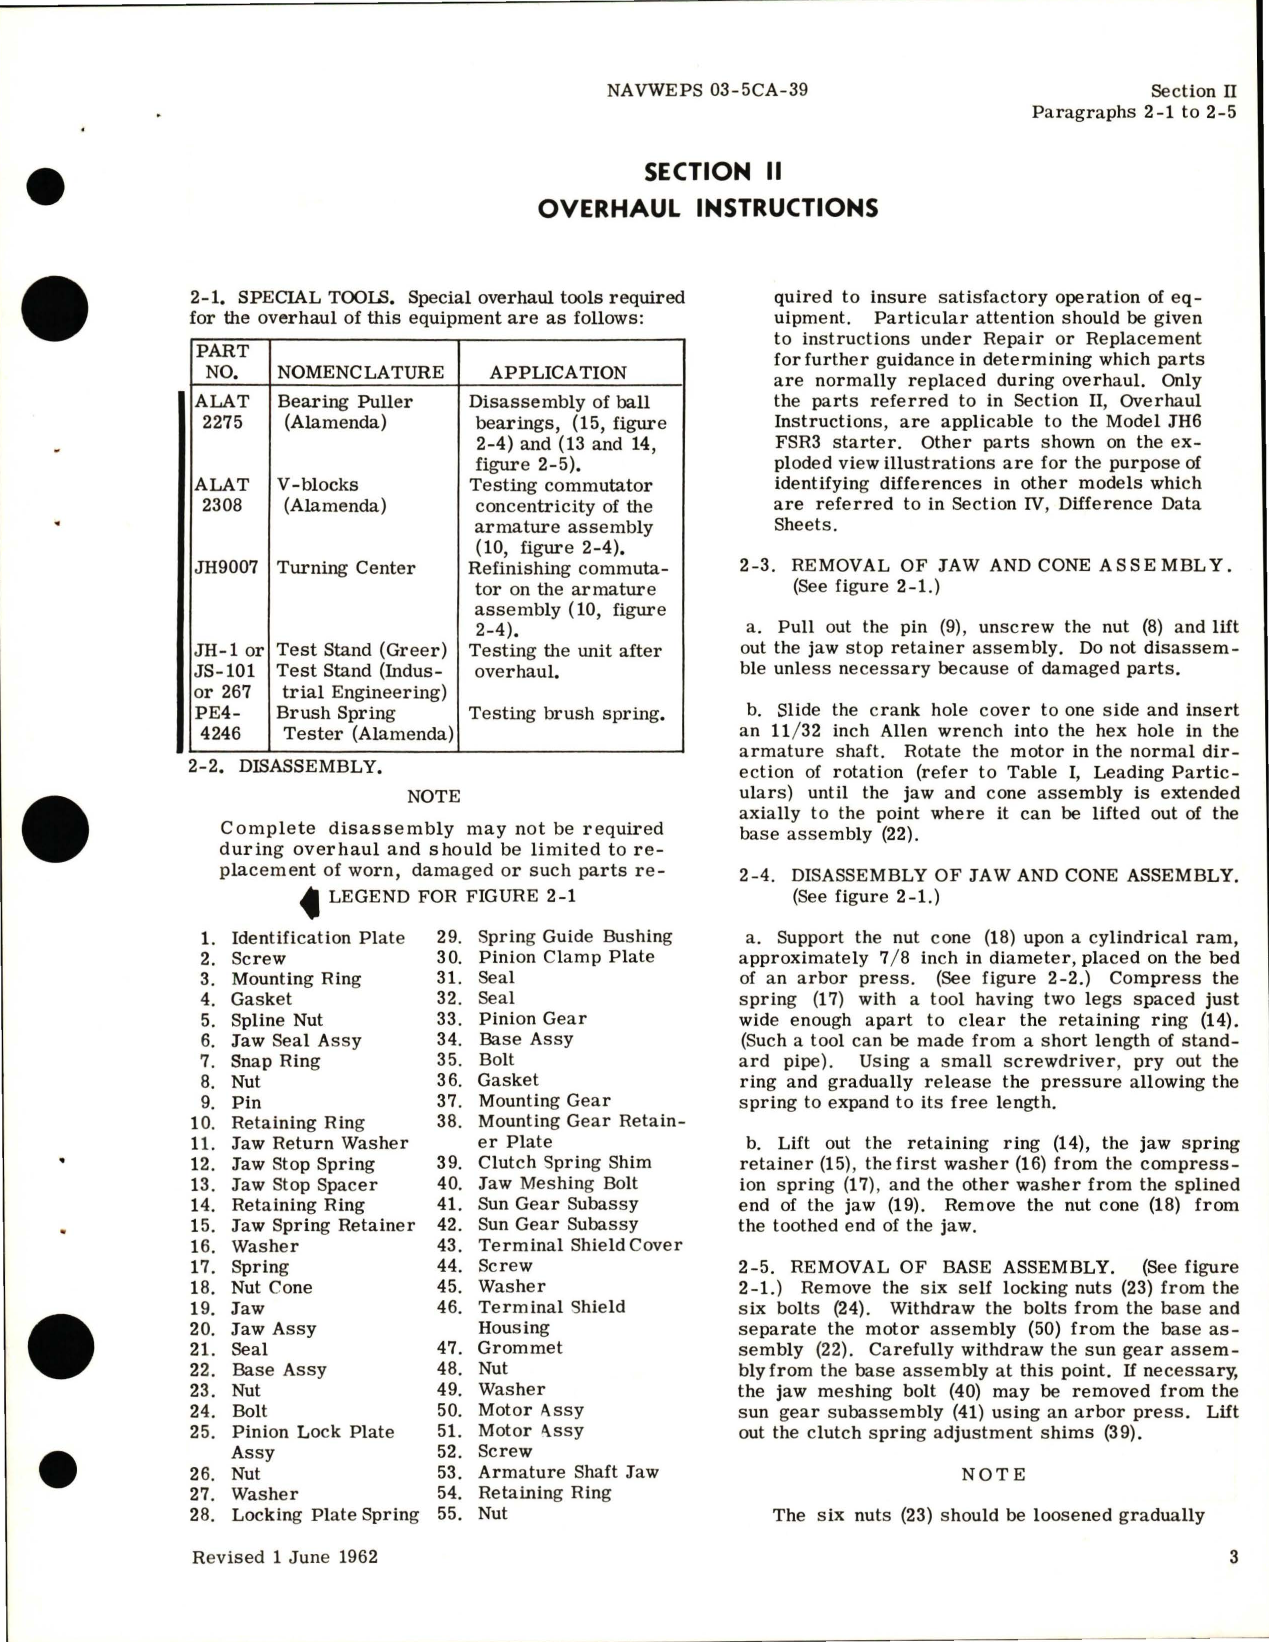 Sample page 7 from AirCorps Library document: Overhaul Instructions for Engine Starters 